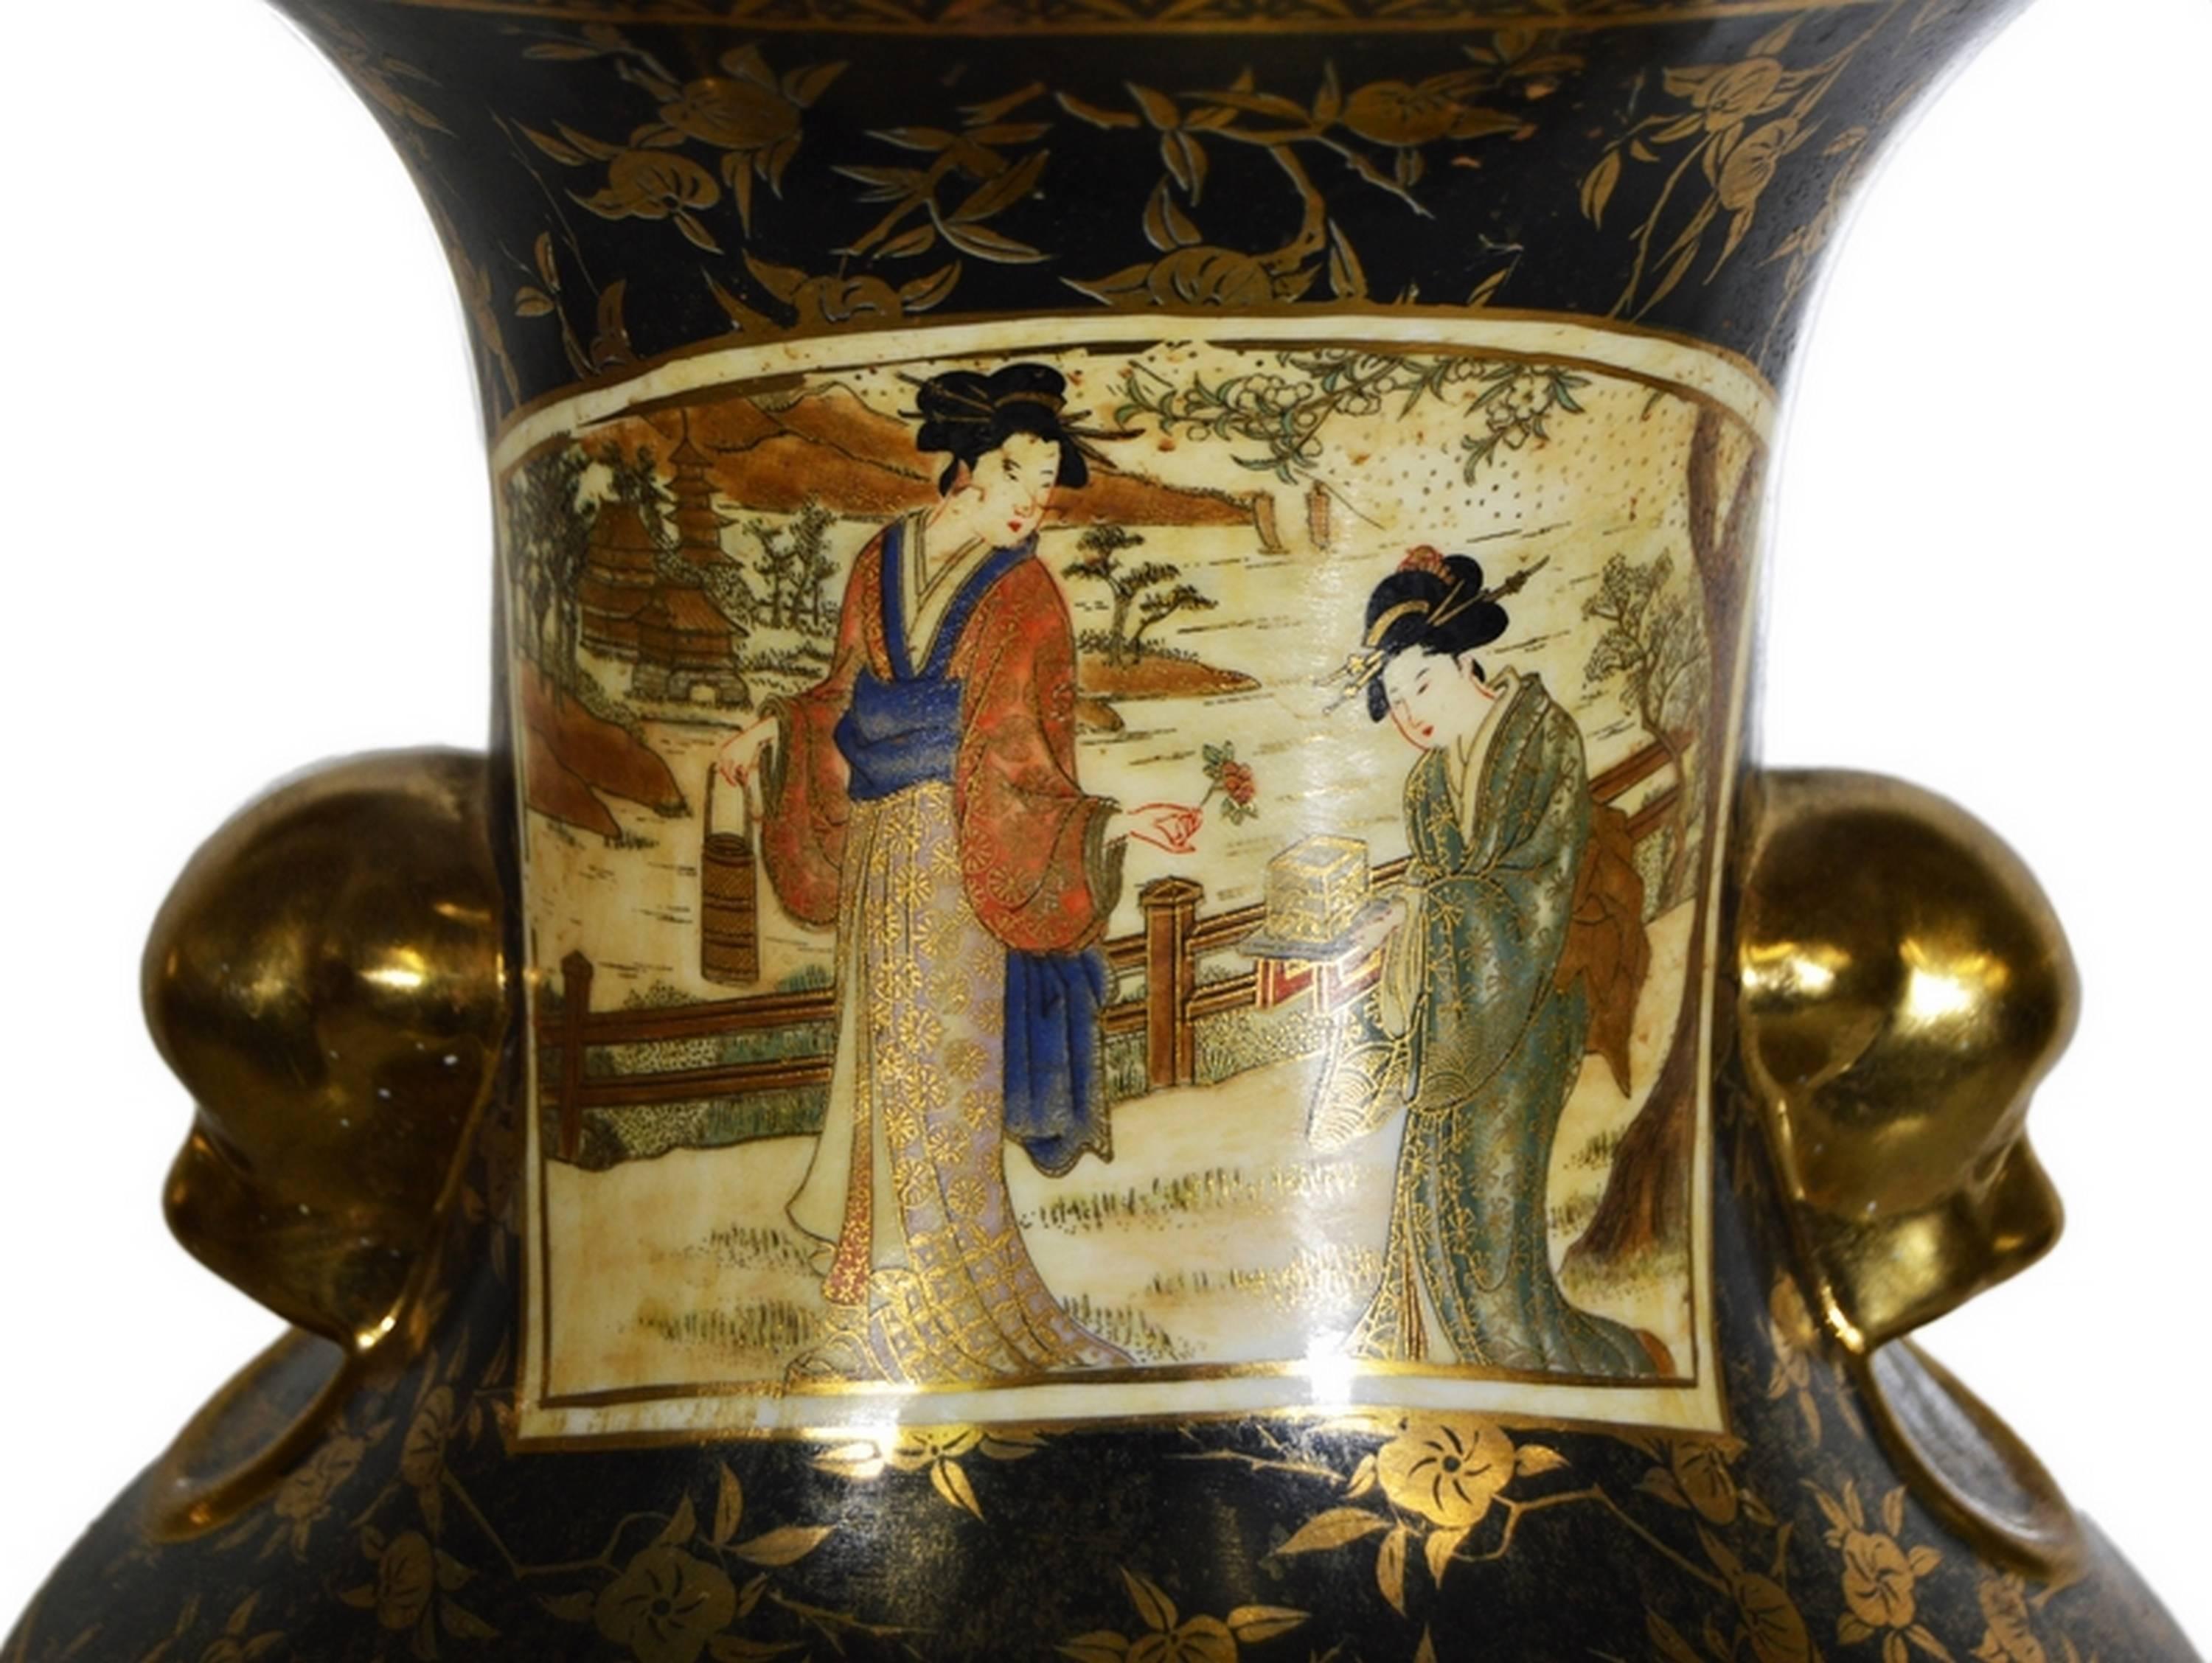 Vintage Hand-Painted Porcelain Vase with Gilded Accents from 20th Century, China For Sale 4